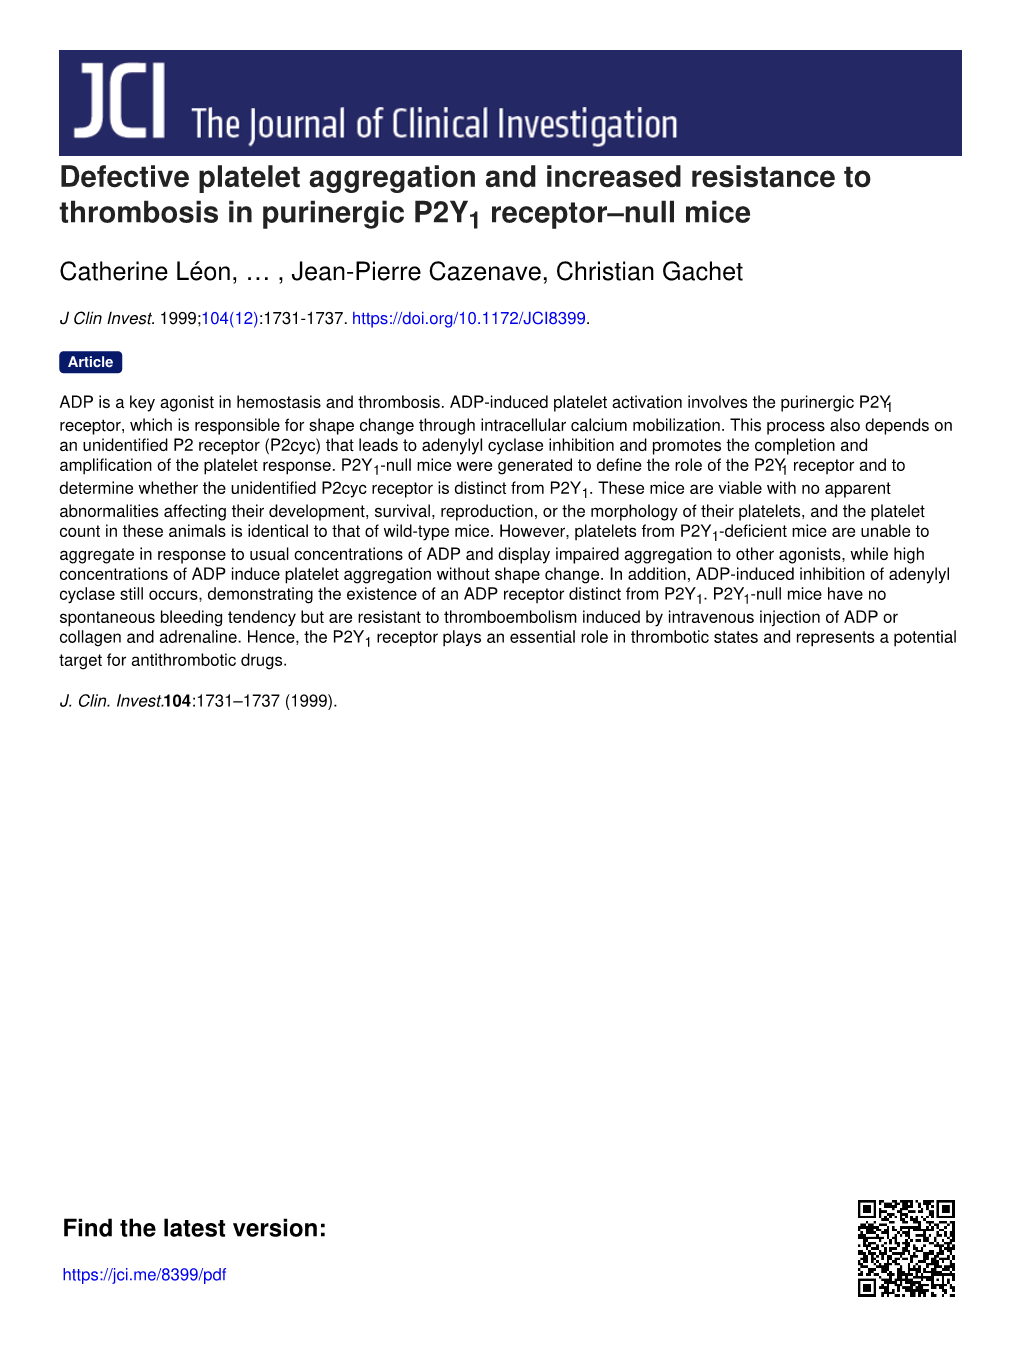 Defective Platelet Aggregation and Increased Resistance to Thrombosis in Purinergic P2Y1 Receptor–Null Mice